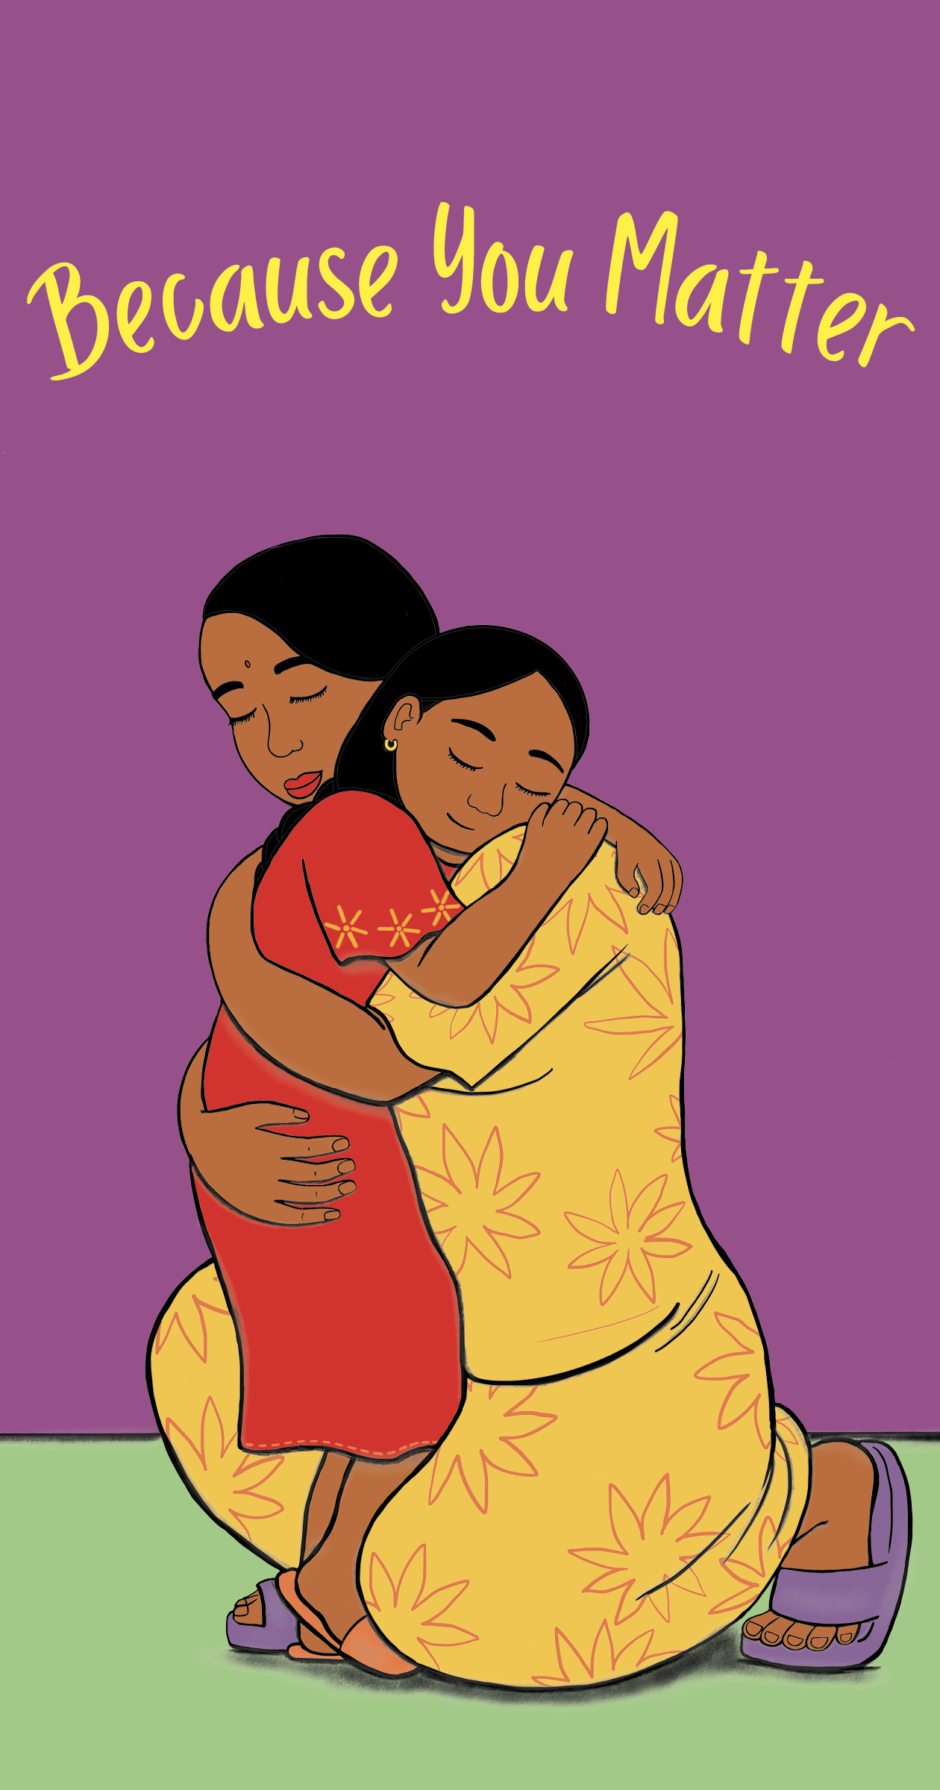 Illustration of a woman kneeling on the ground to hug a young girl. The woman is wearing a yellow dress with a pink design on it and the girl is wearing a red dress with yellow flowers on the sleeve. They both have black hair and medium-deep skin tones.